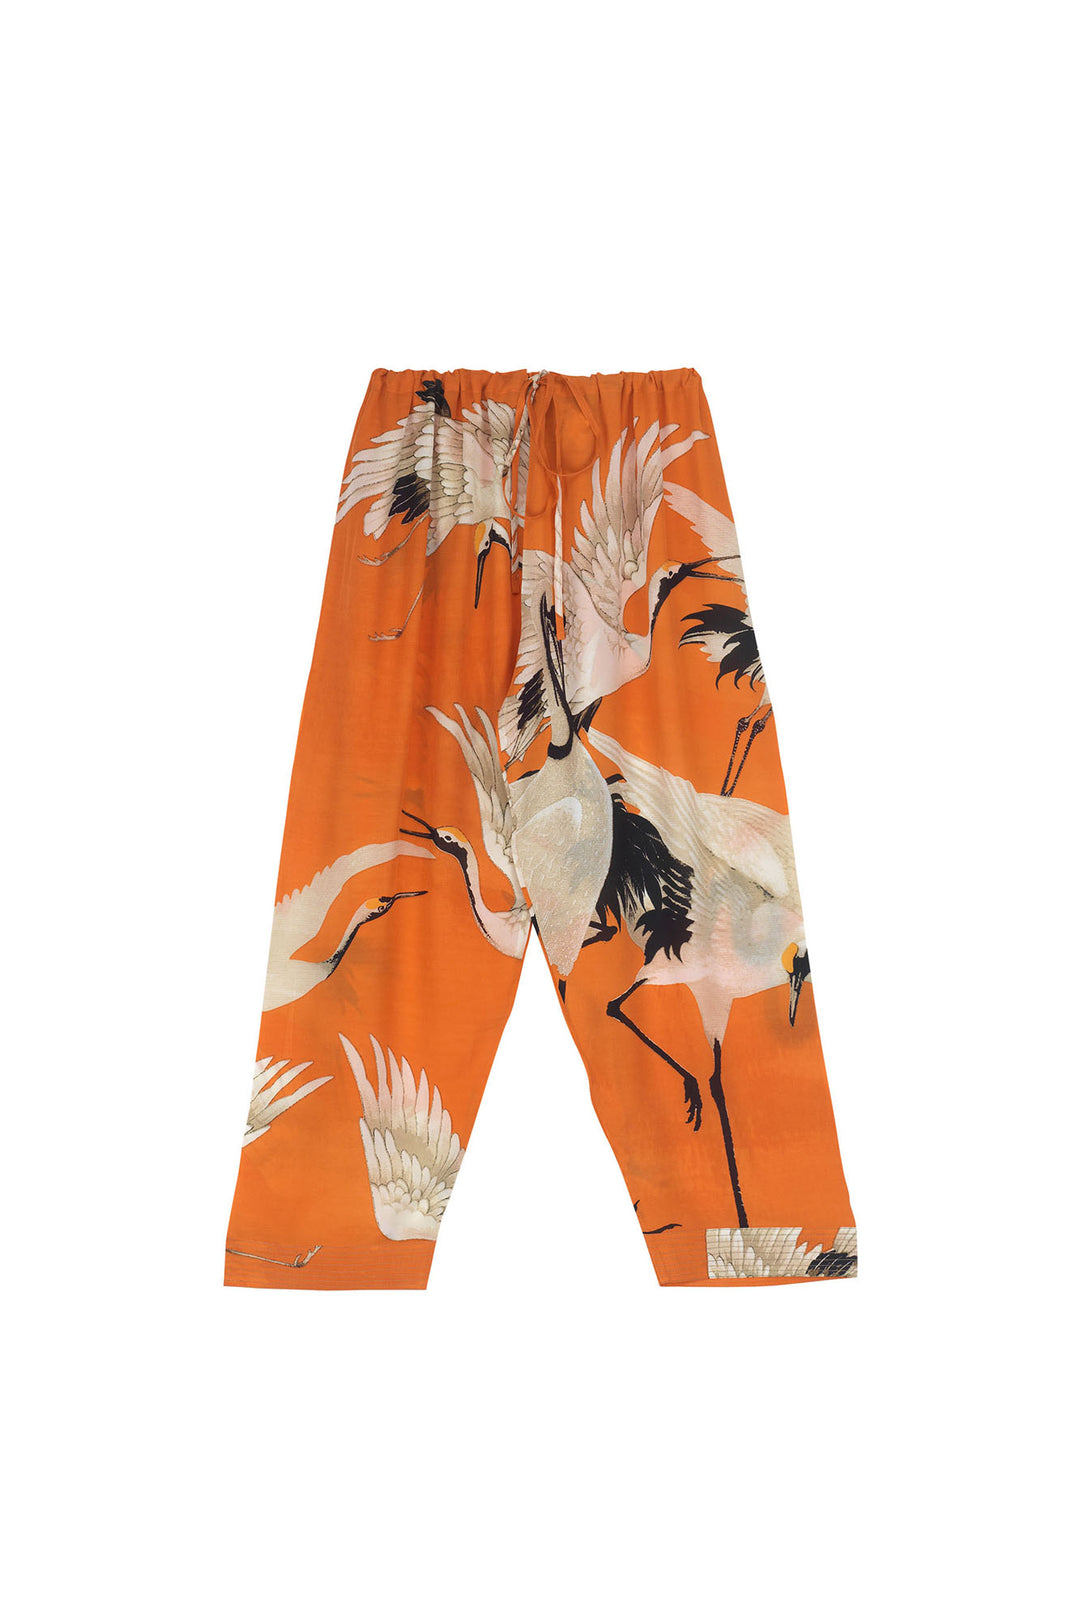 One Hundred Stars Stork Orange Crepe Lounge Pants- These versatile cropped wide leg bottoms make the perfect lounge wear and have a super soft fit and feel making them ideal for a relaxed look.